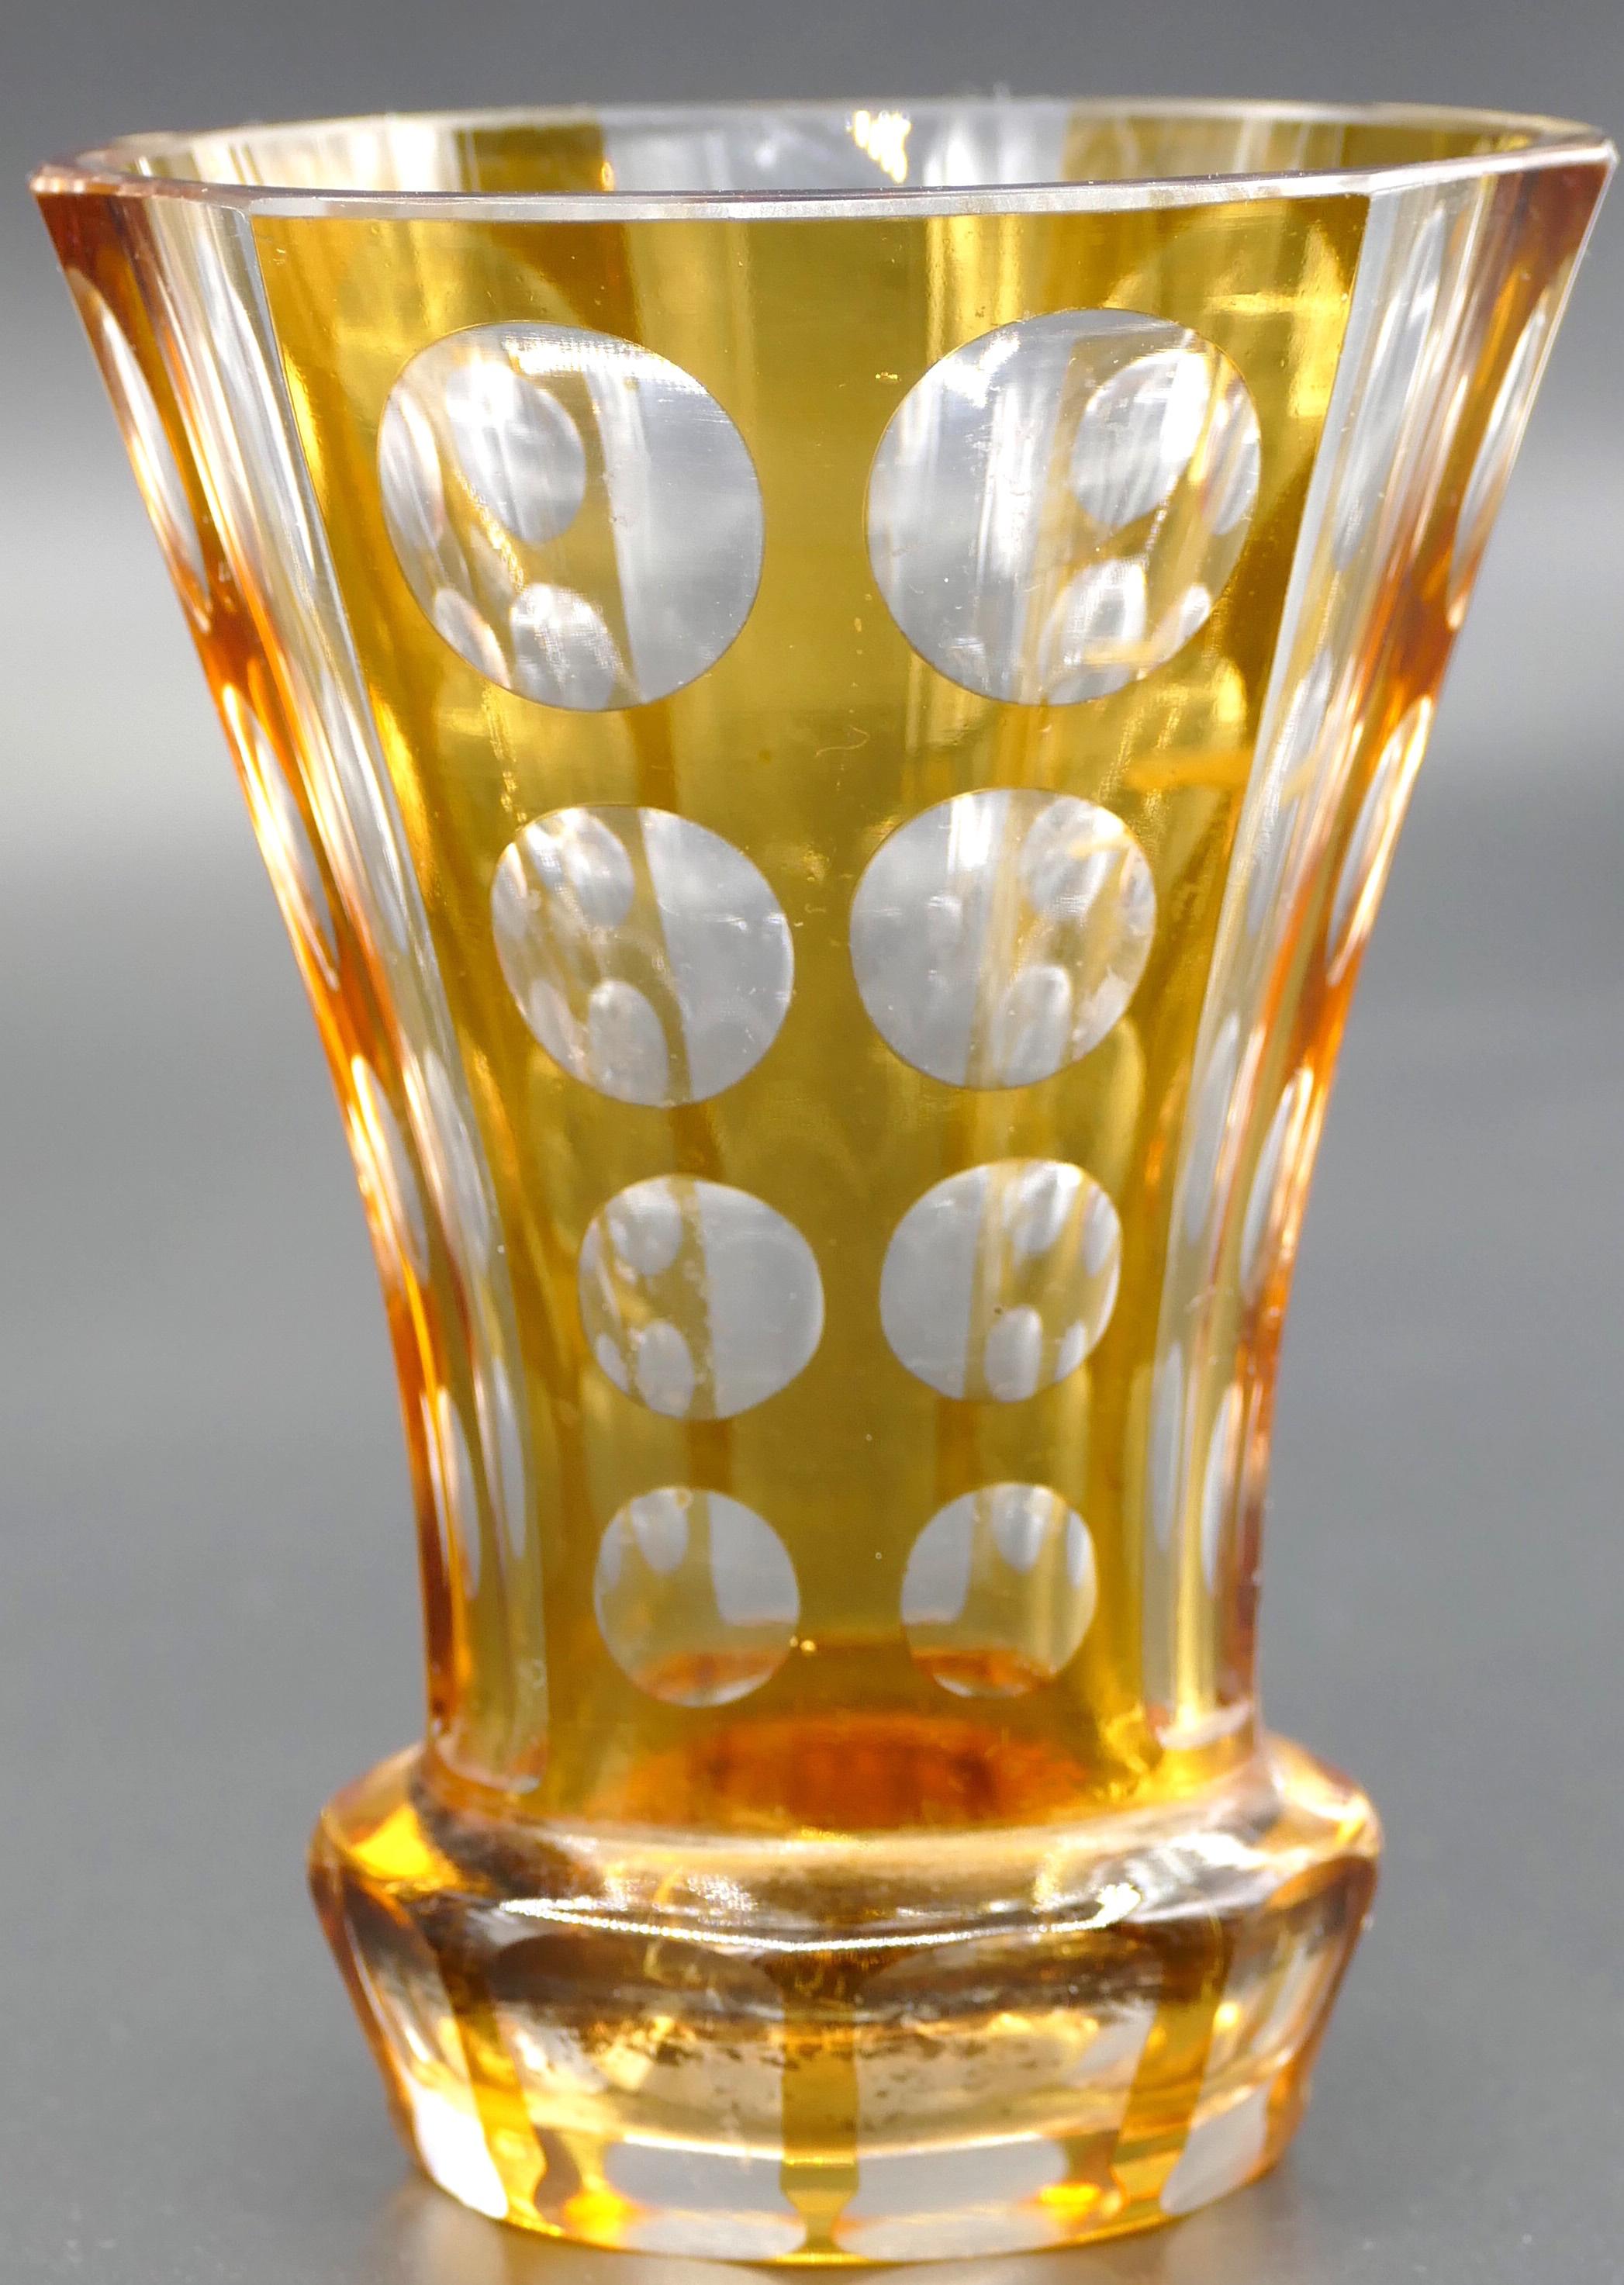 Flared glass vase is an original decorative object realized in glass in the second decade of the 20th century. 

Original glass with yellow glaze. 

Made in Germany.

Not very good conditions: peeling and lens cut, originally with gold rim.